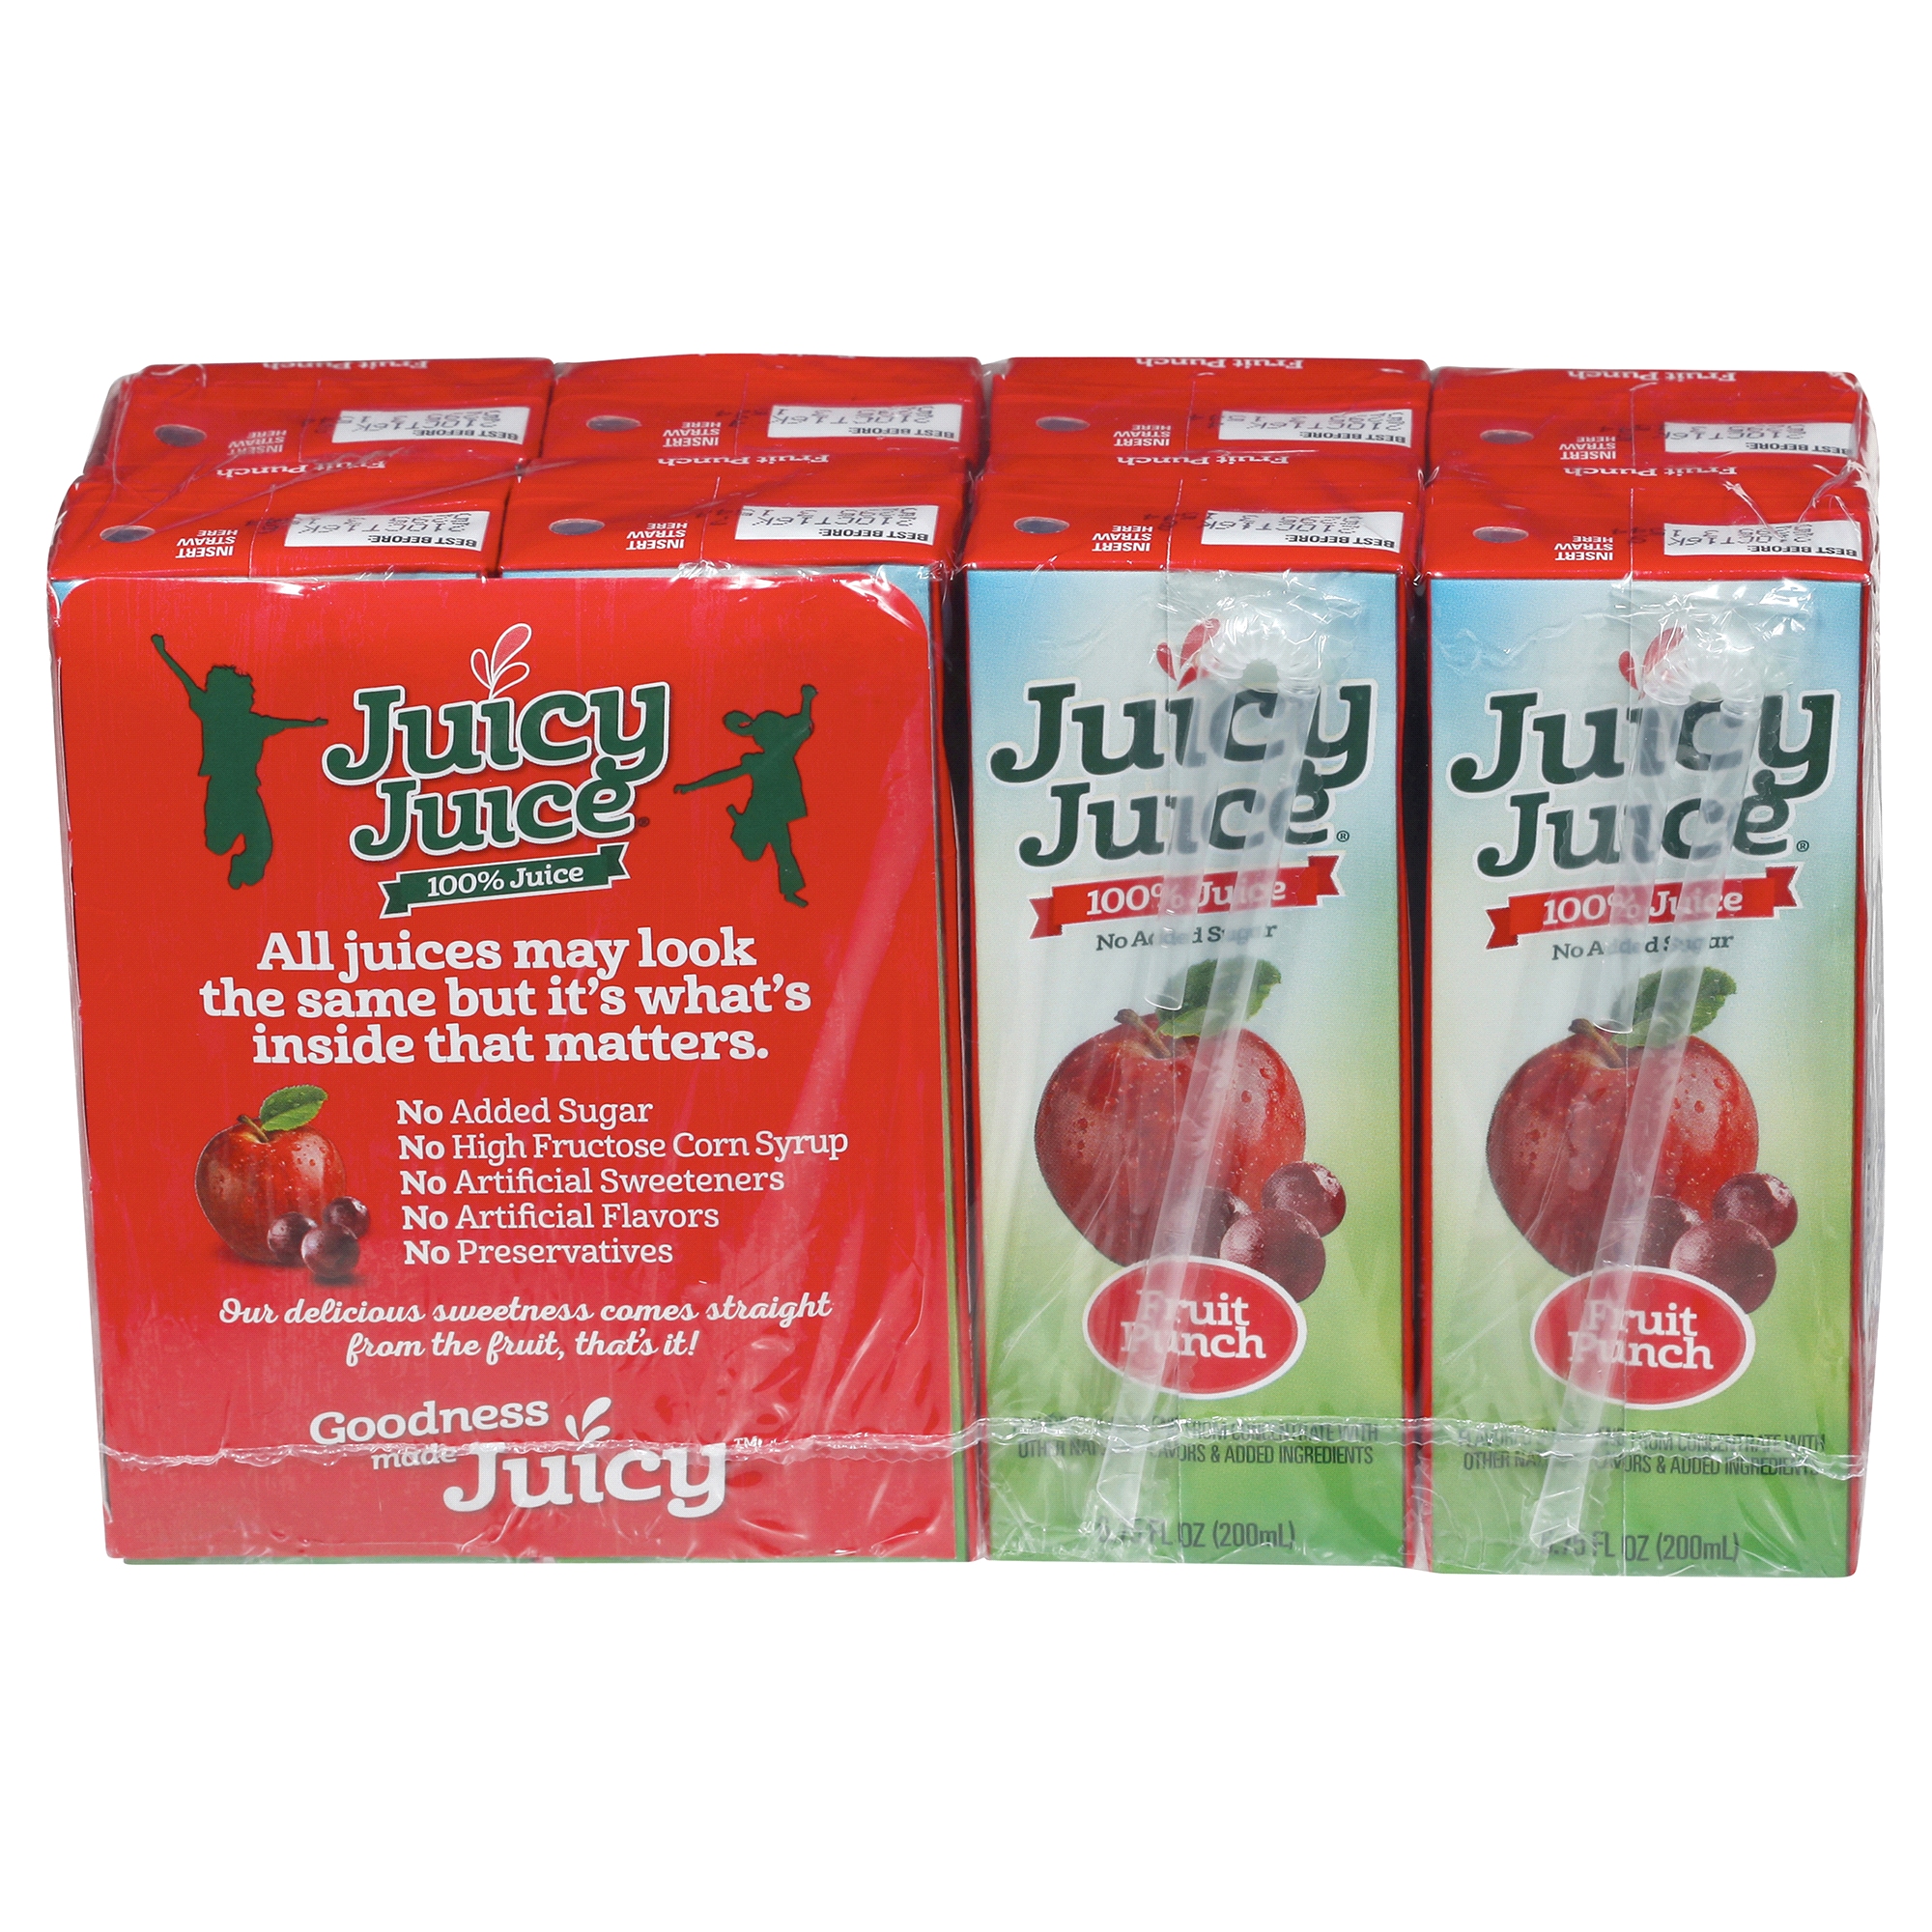 1 cup of apple juice nutrition facts